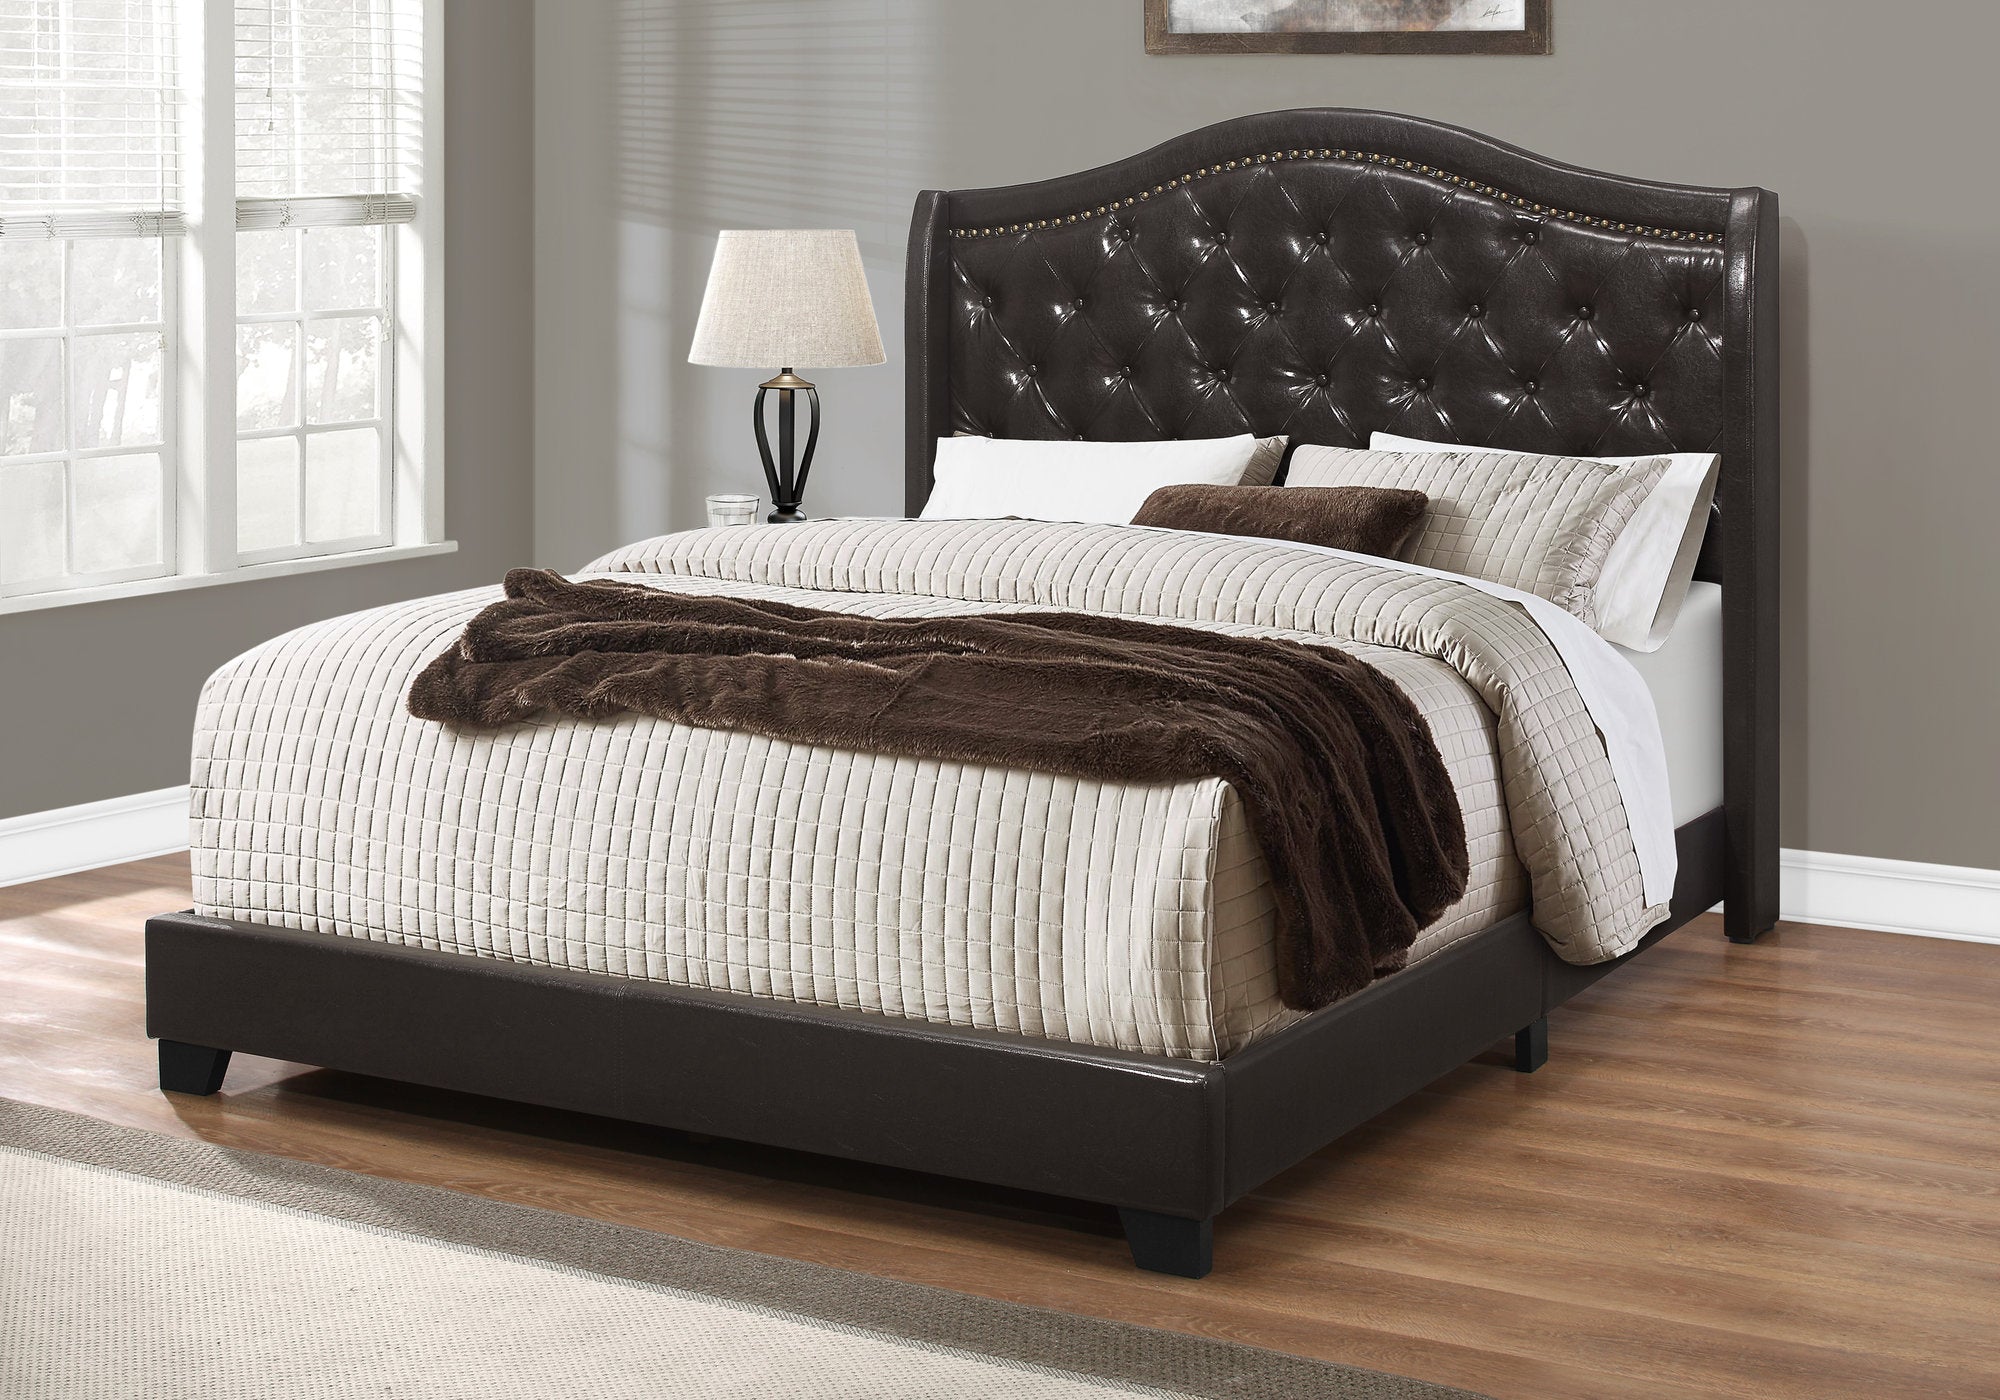 bed queen size brown leather look with brass trim i5969q